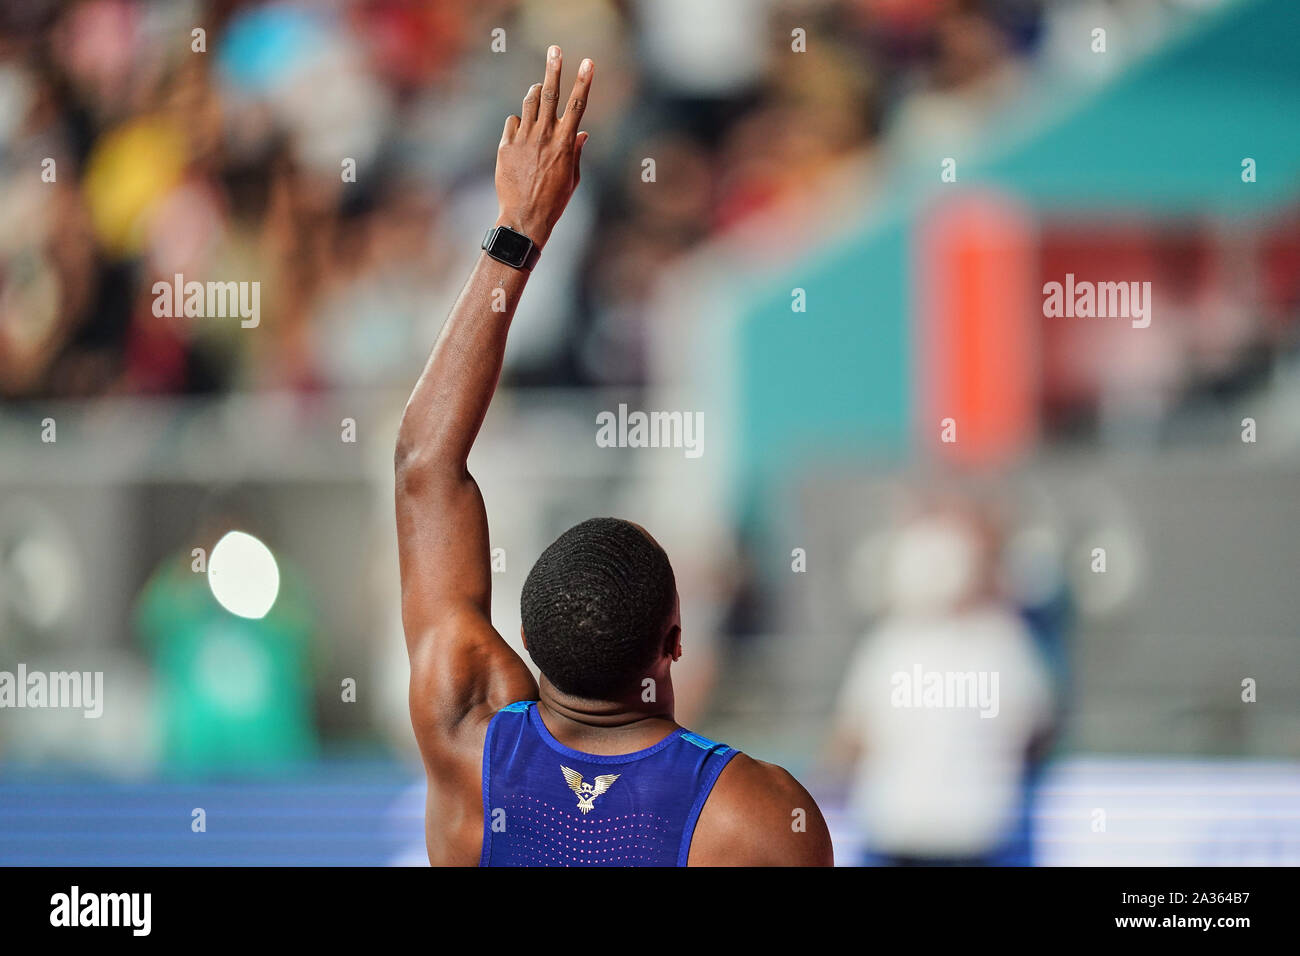 Doha, Qatar. 5th Oct, 2019. Christian Coleman of United States competing in 100 meter relay for men during the 17th IAAF World Athletics Championships at the Khalifa Stadium in Doha, Qatar. Ulrik Pedersen/CSM/Alamy Live News Stock Photo